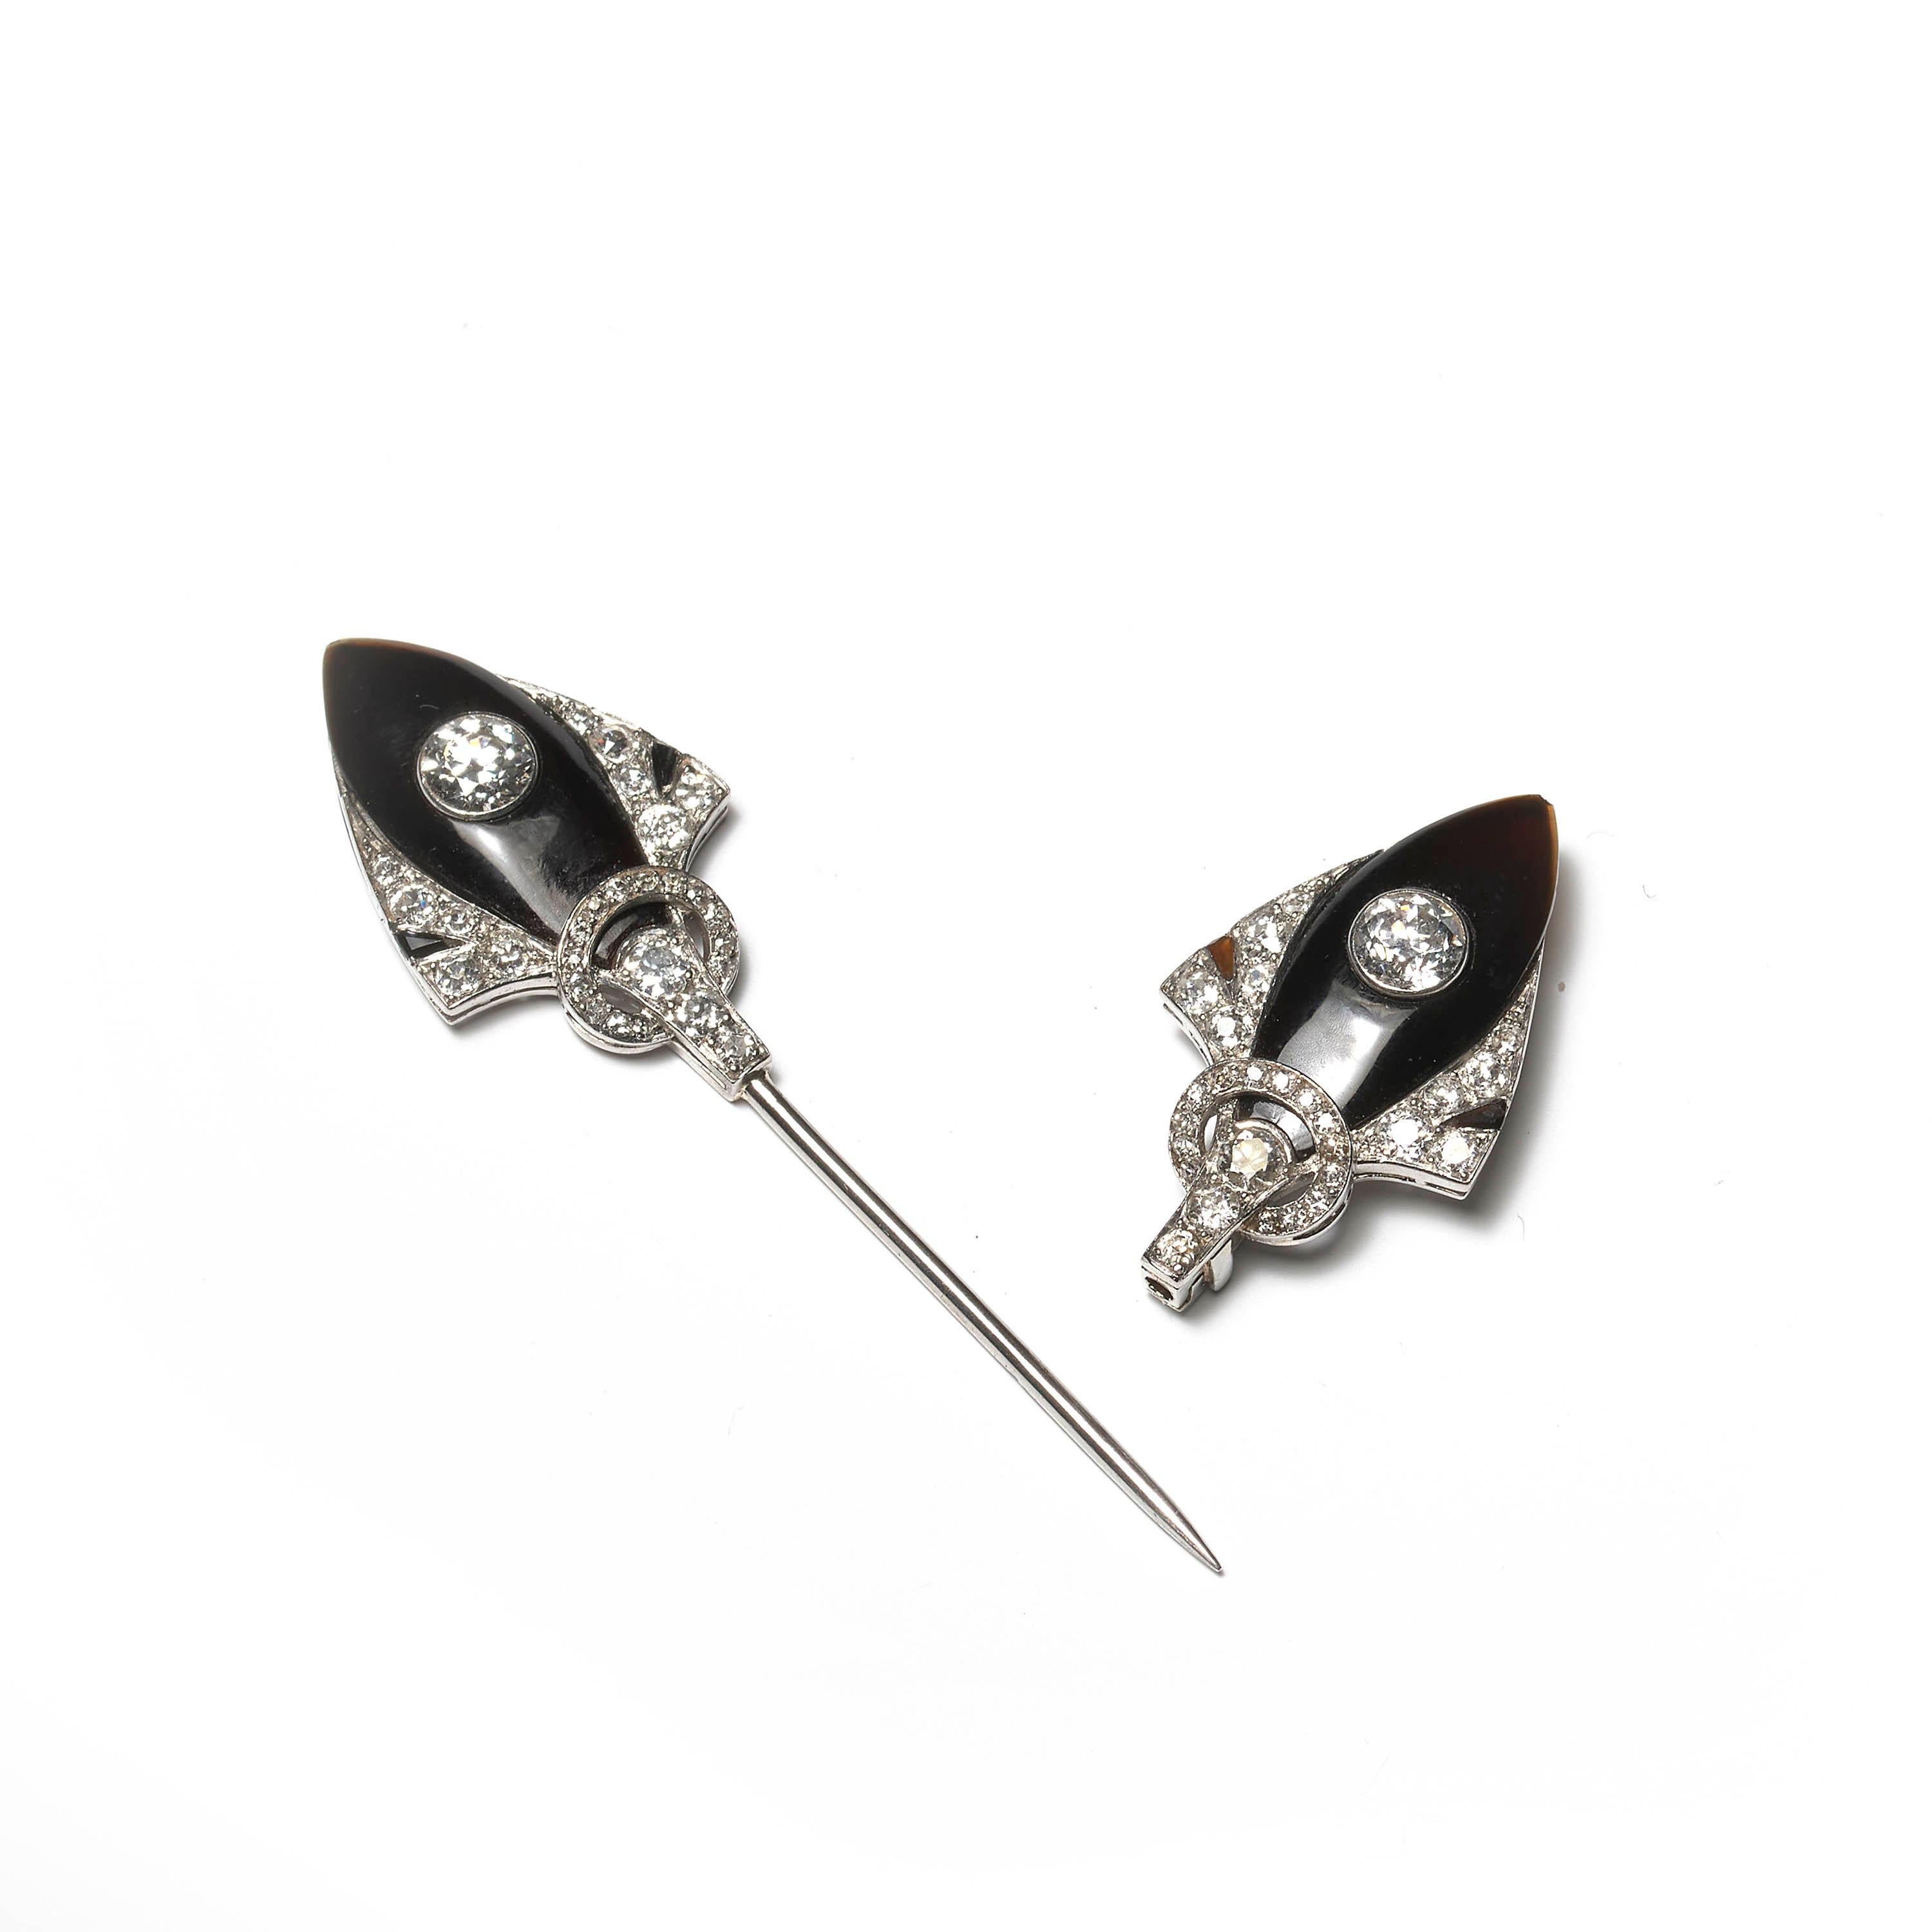 An antique Belle Epoque jabot pin, comprised of two shield-shaped sections set with polished black onyx and transitional-cut diamonds, all mounted in platinum, with possible French hallmarks. The total estimated diamond weight is 2.50 carats. Circa